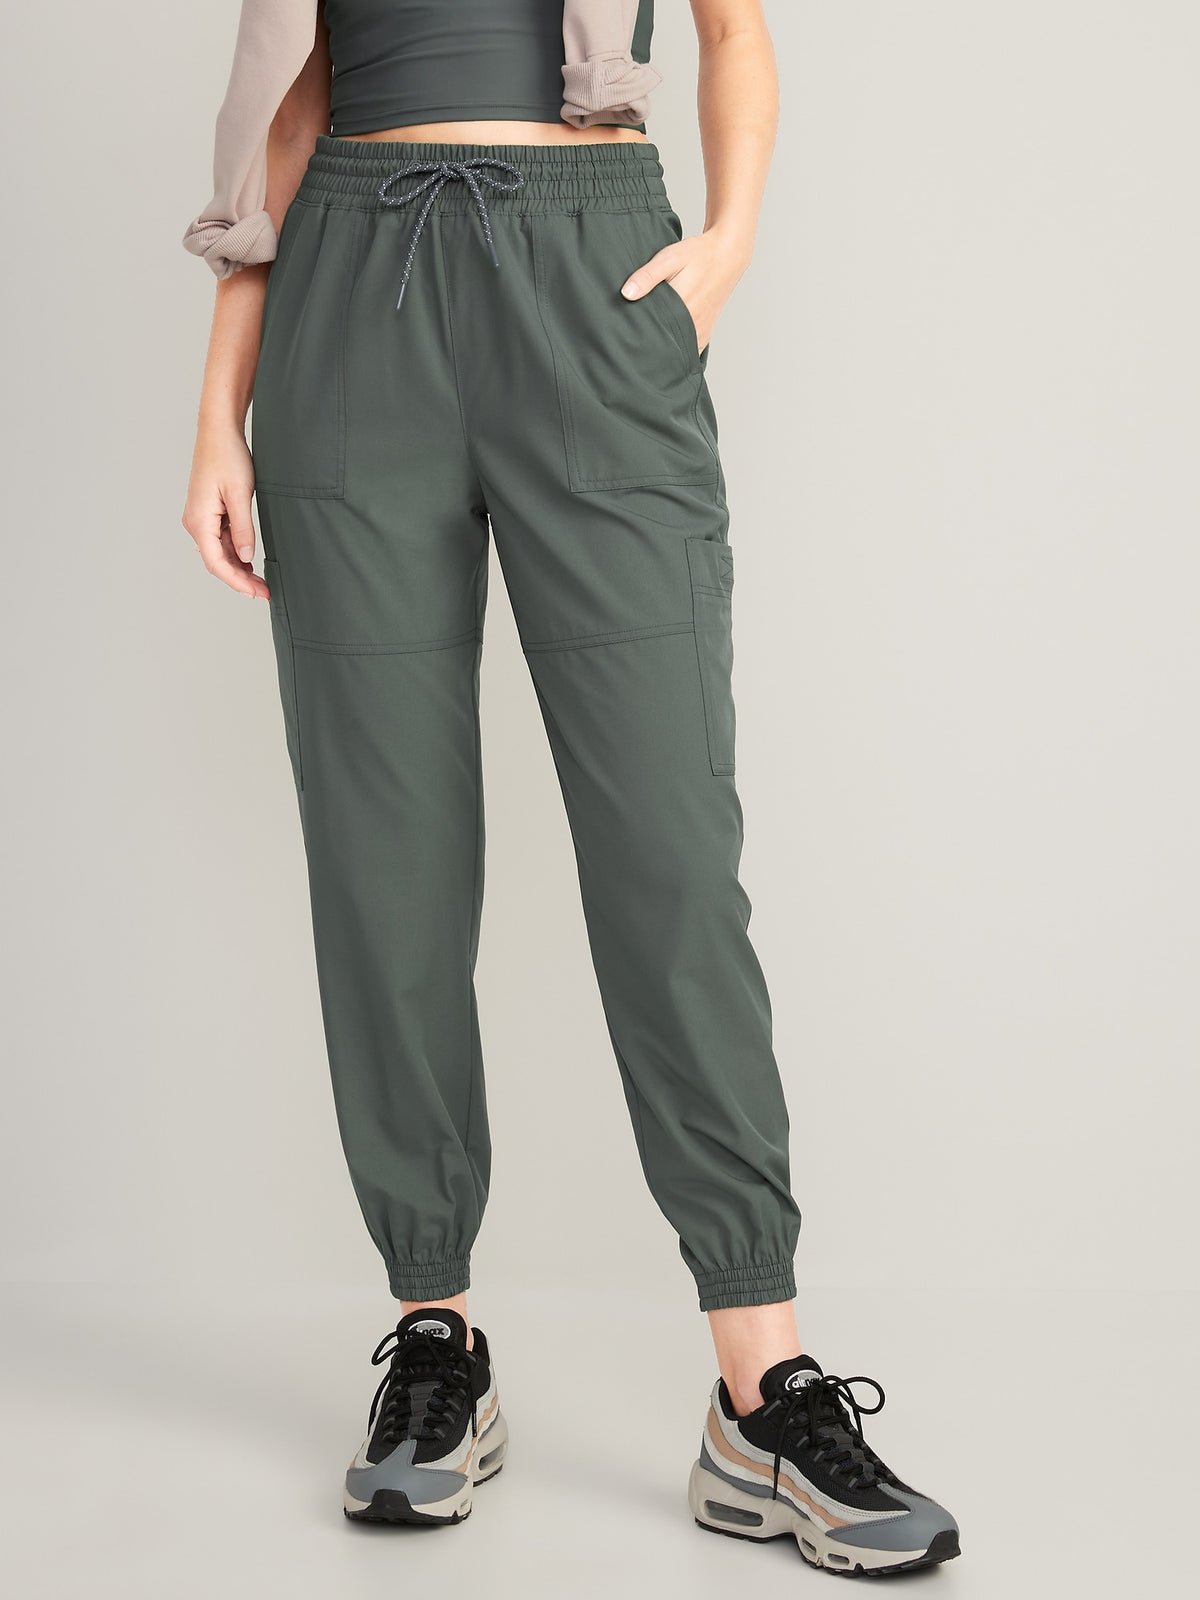 Extra High-Waisted StretchTech Performance Cargo Jogger Pants for Women_ForestShade_2450.jpeg